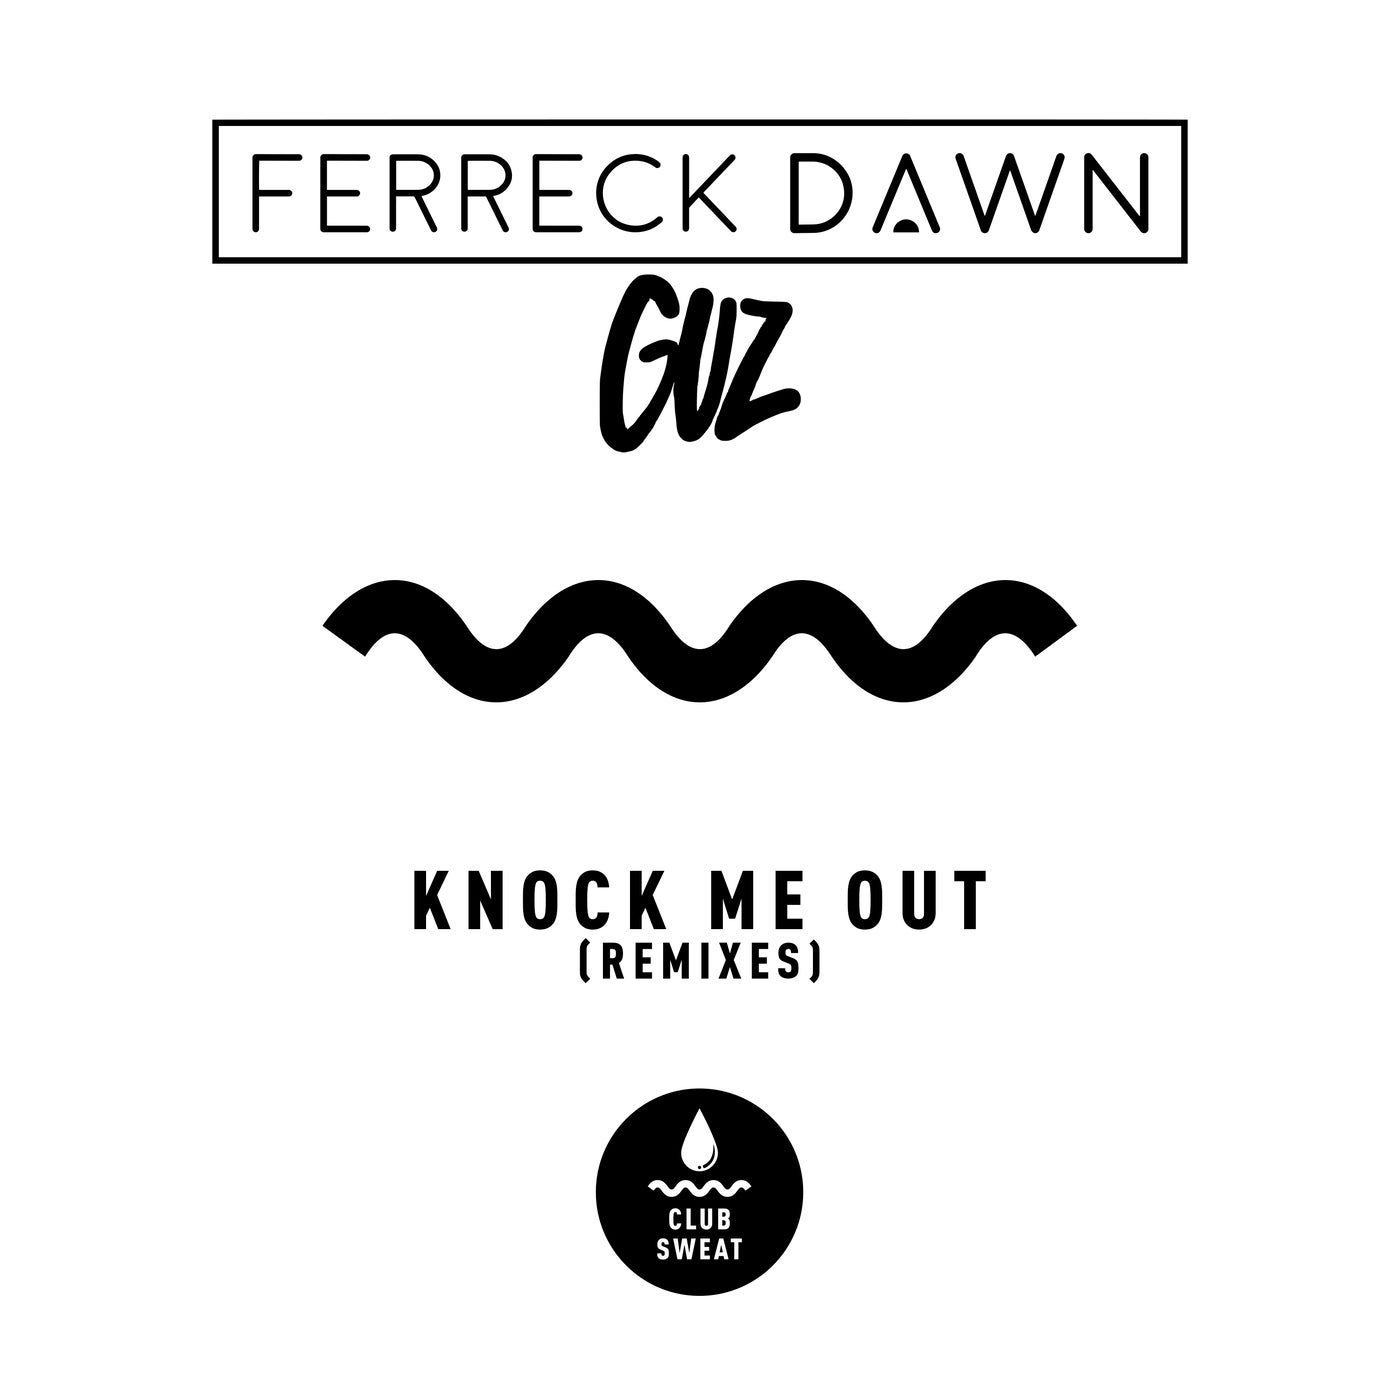 image cover: Ferreck Dawn, GUZ (NL) - Knock Me Out (Remixes) / CLUBSWE323